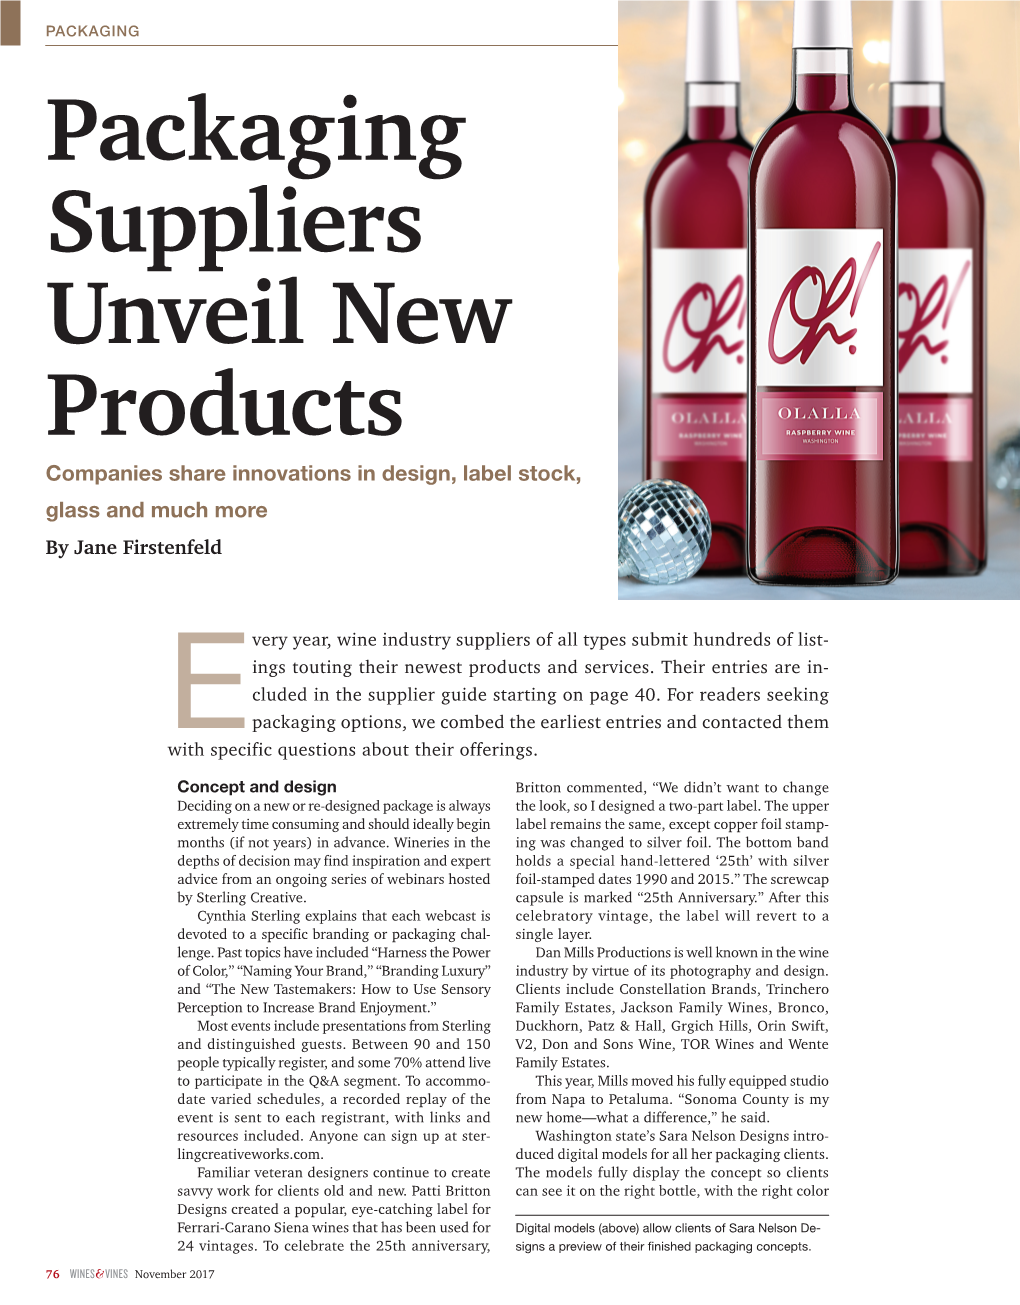 Packaging Suppliers Unveil New Products Companies Share Innovations in Design, Label Stock, Glass and Much More by Jane Firstenfeld